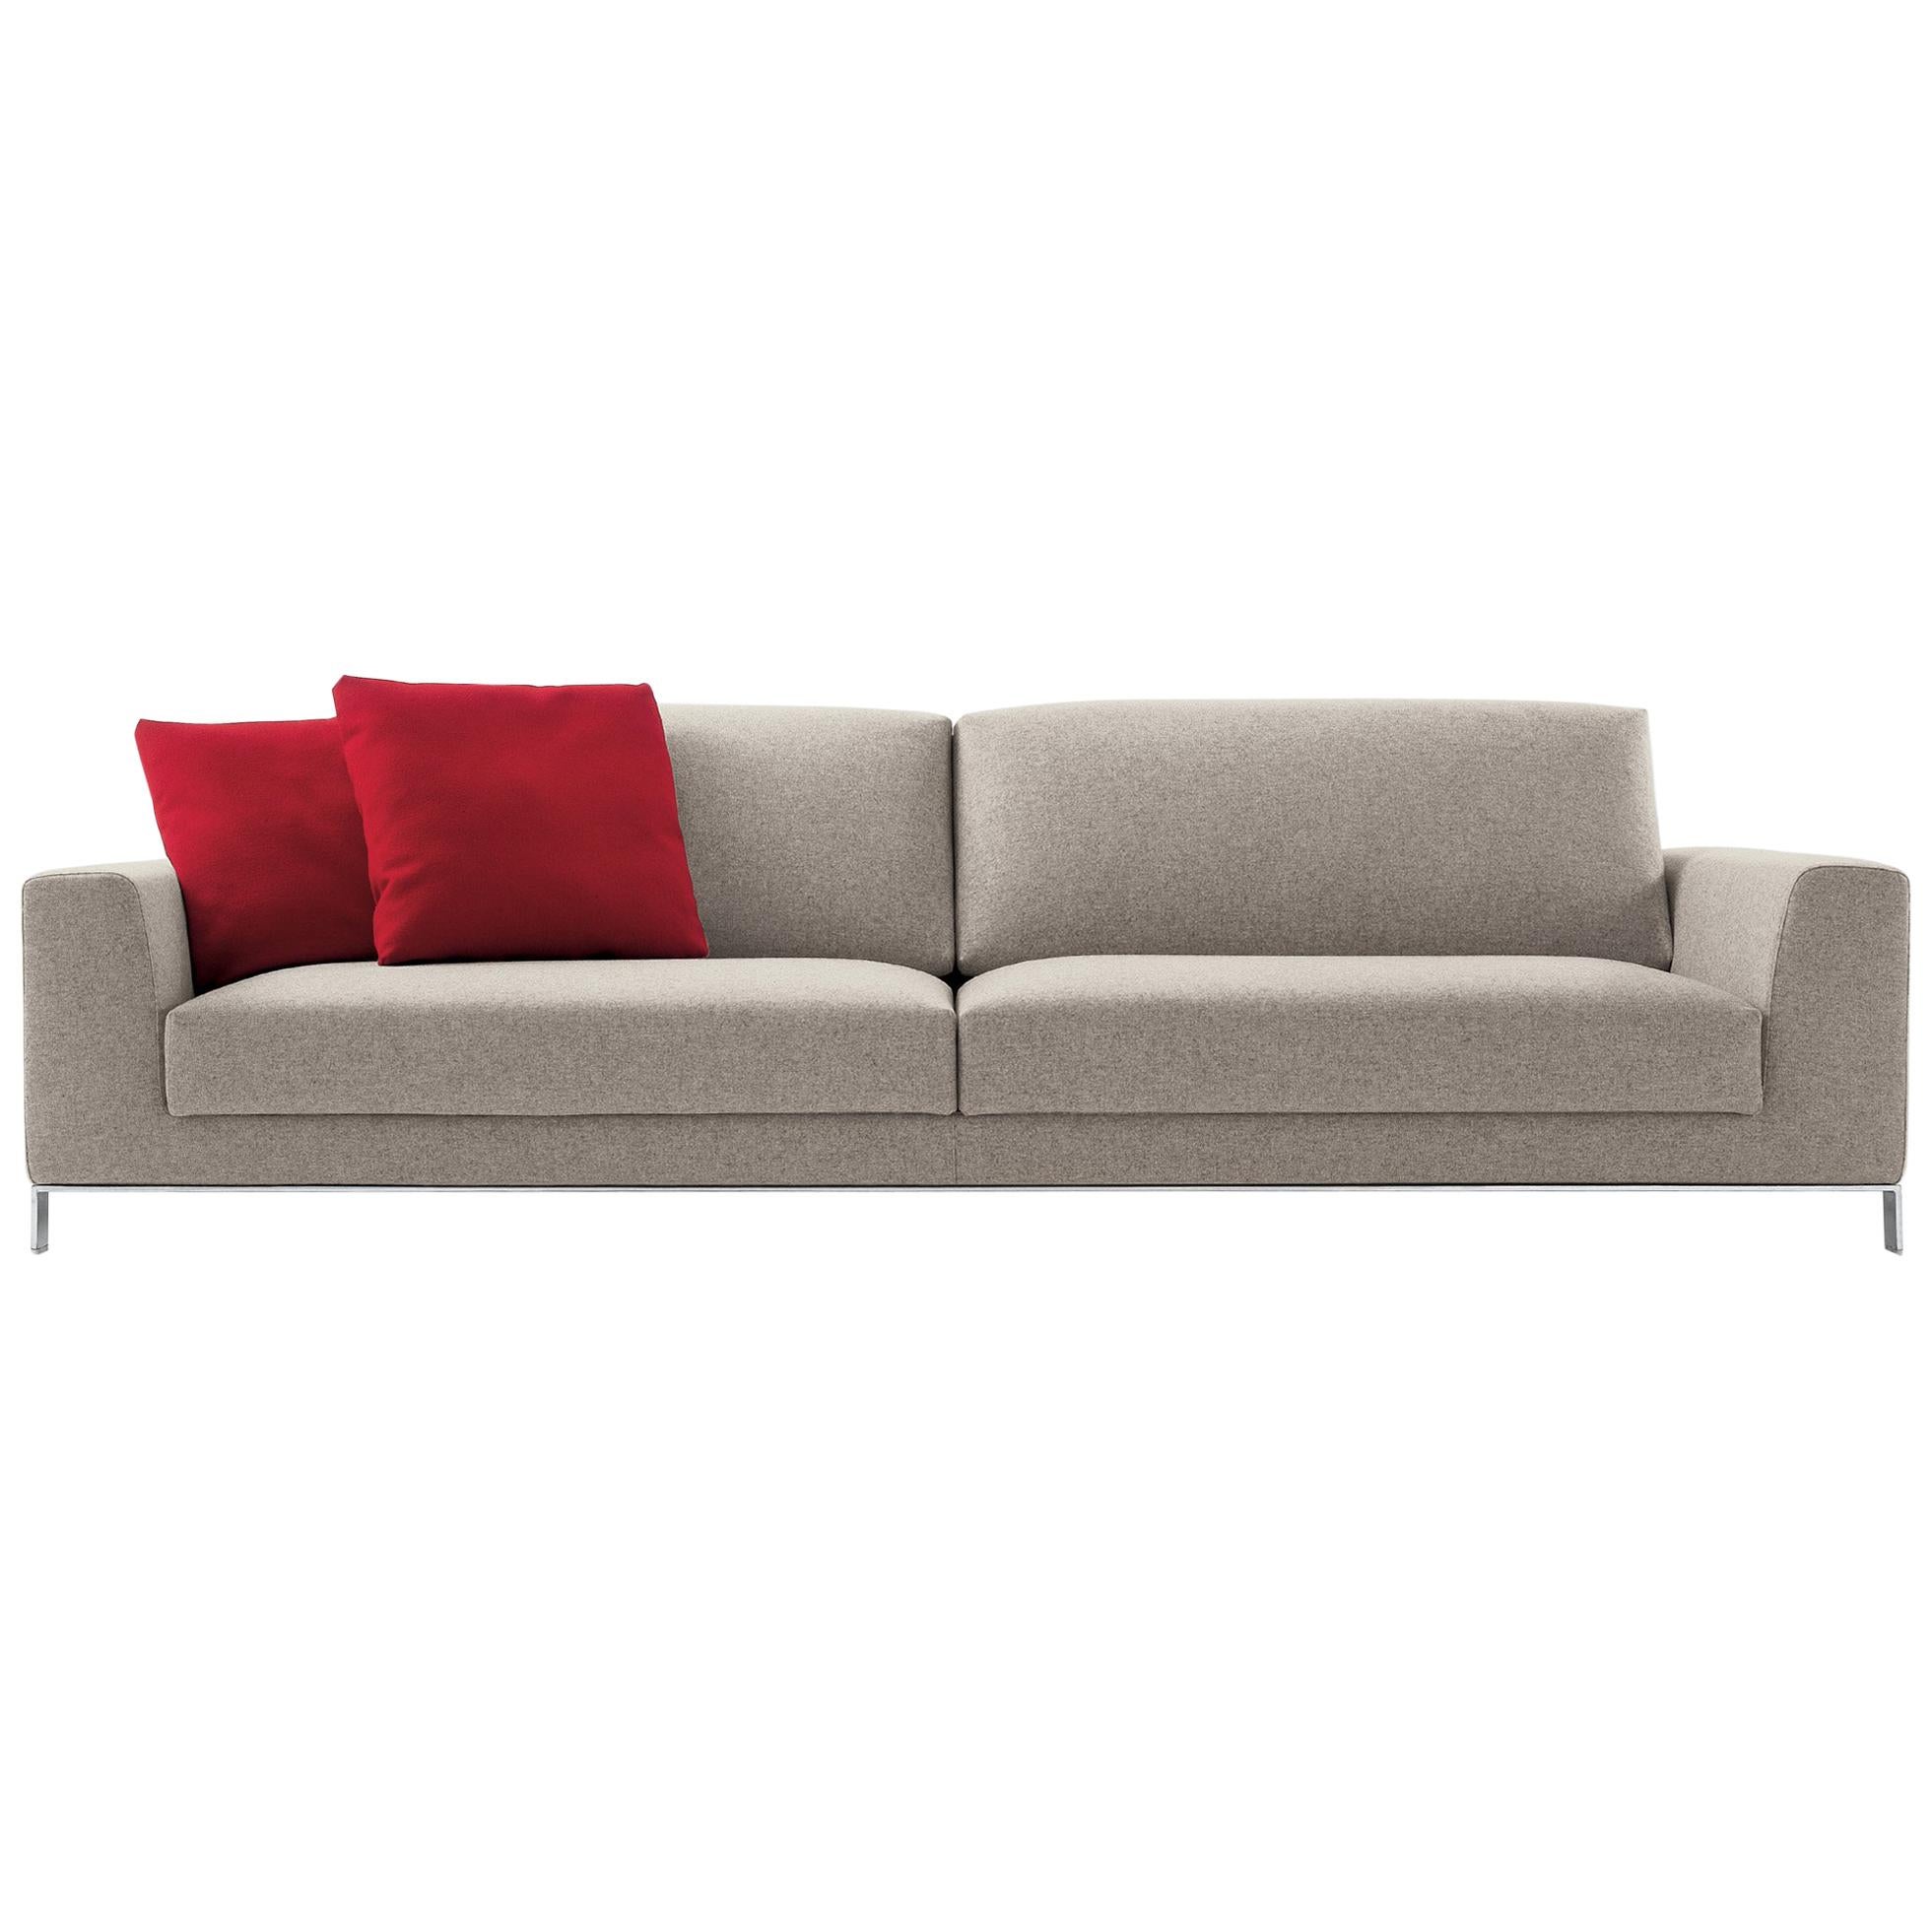 Nube Italia Eddy Sofa in Tan Upholstery by Kemistry of Style For Sale